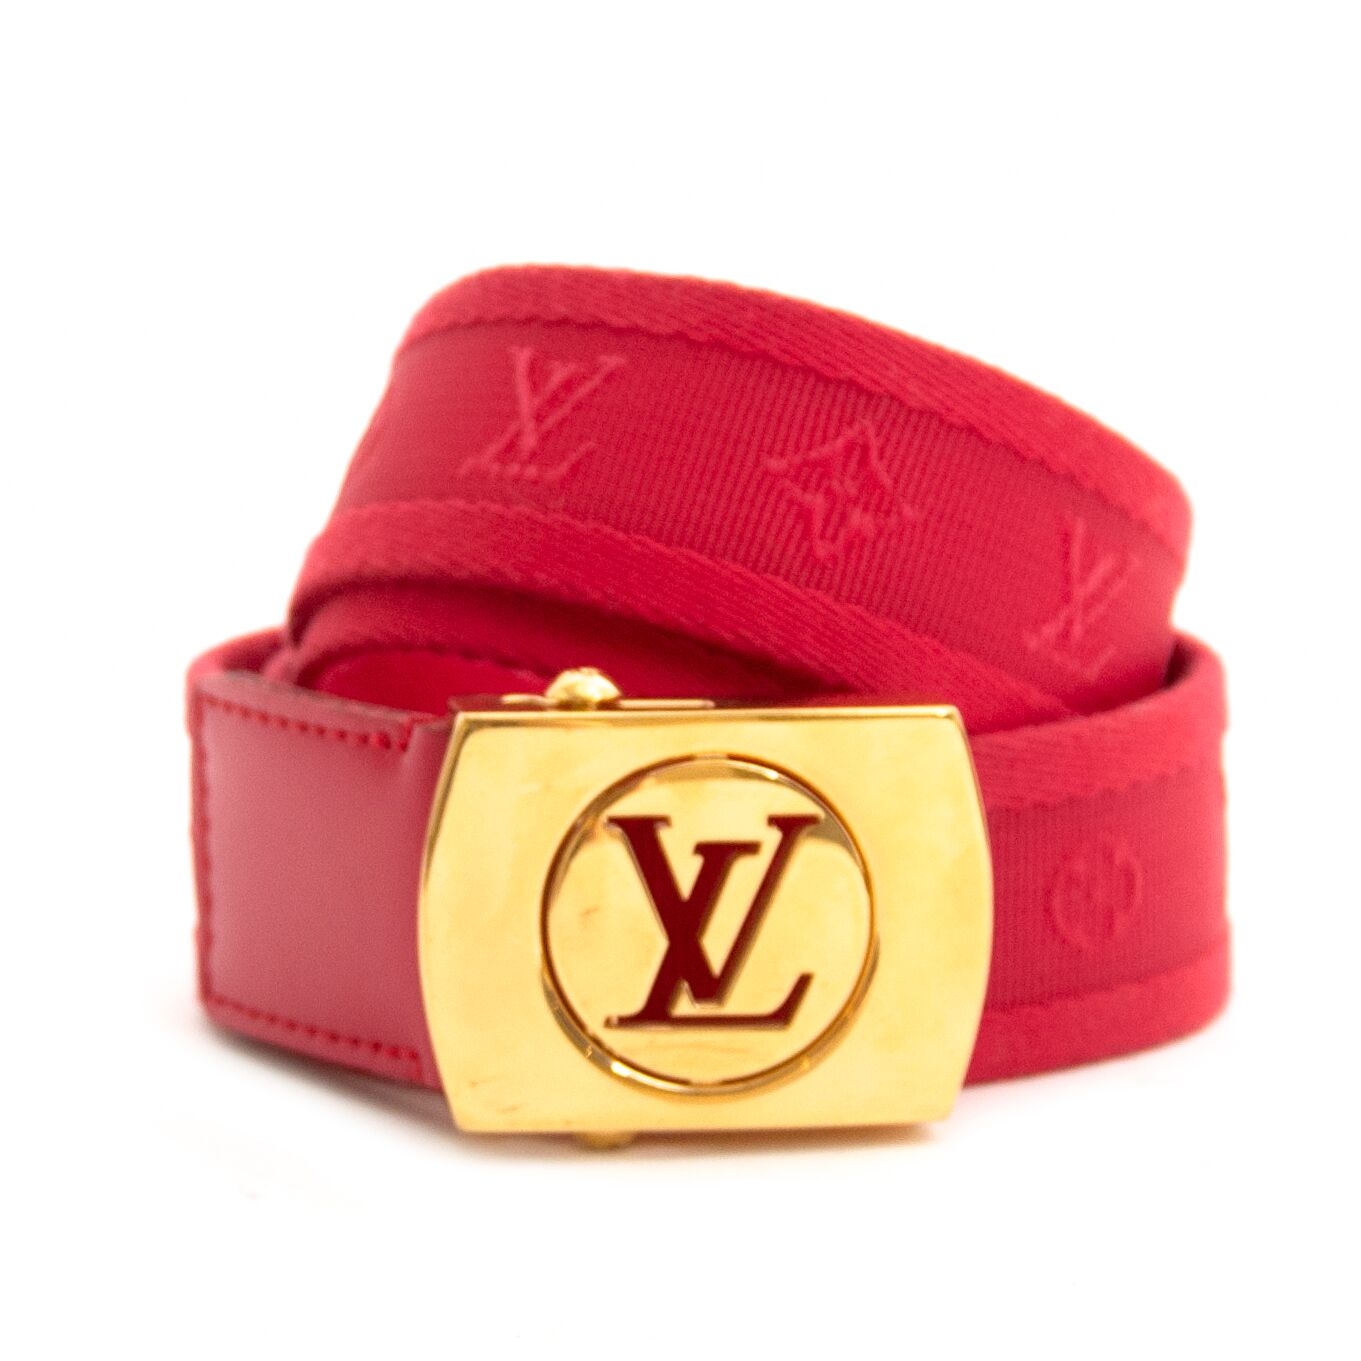 Louis Vuitton Belt Dying, resist, cutout and sewing